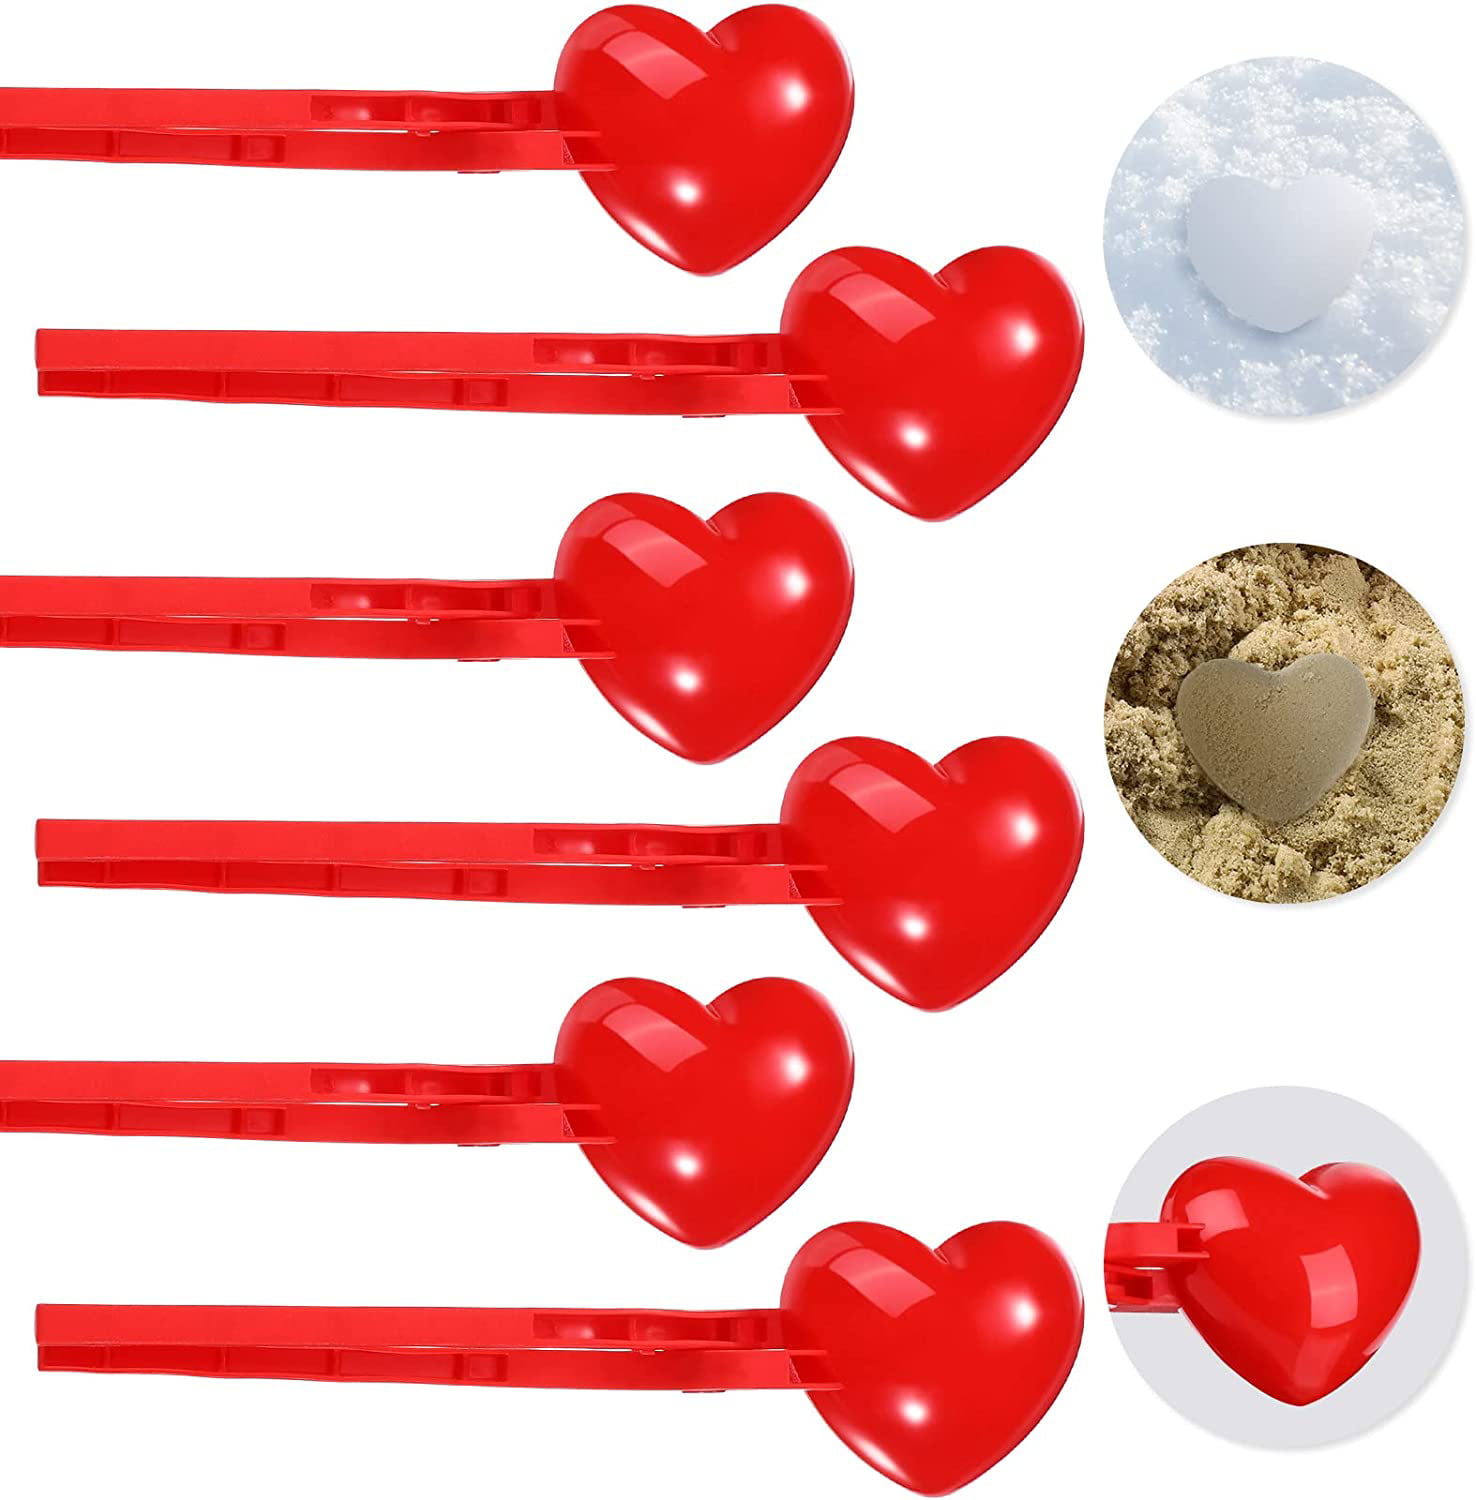 Snowball Maker Tool with Handle Love Heart Snowball Maker Tool for Kids and Adults Snowballs Maker Heart Shape Fun Winter Outdoor Activities and More 